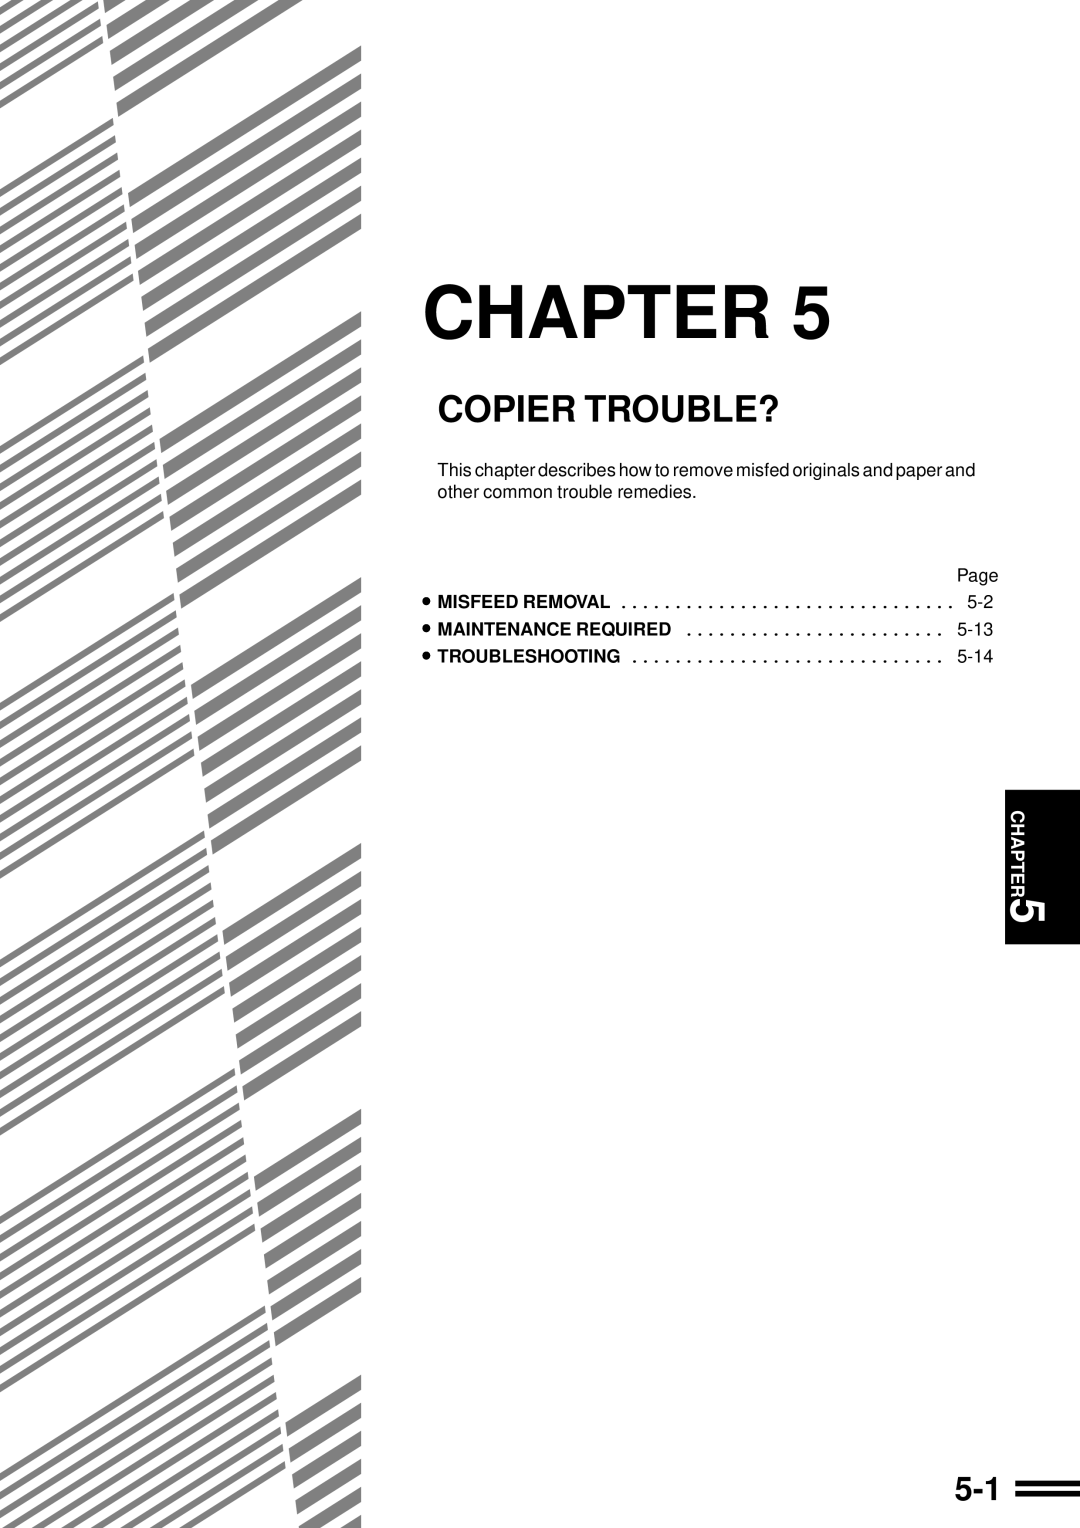 Sharp AR-507 operation manual Copier Trouble?, Chapter, Misfeed Removal, Maintenance Required, Troubleshooting 